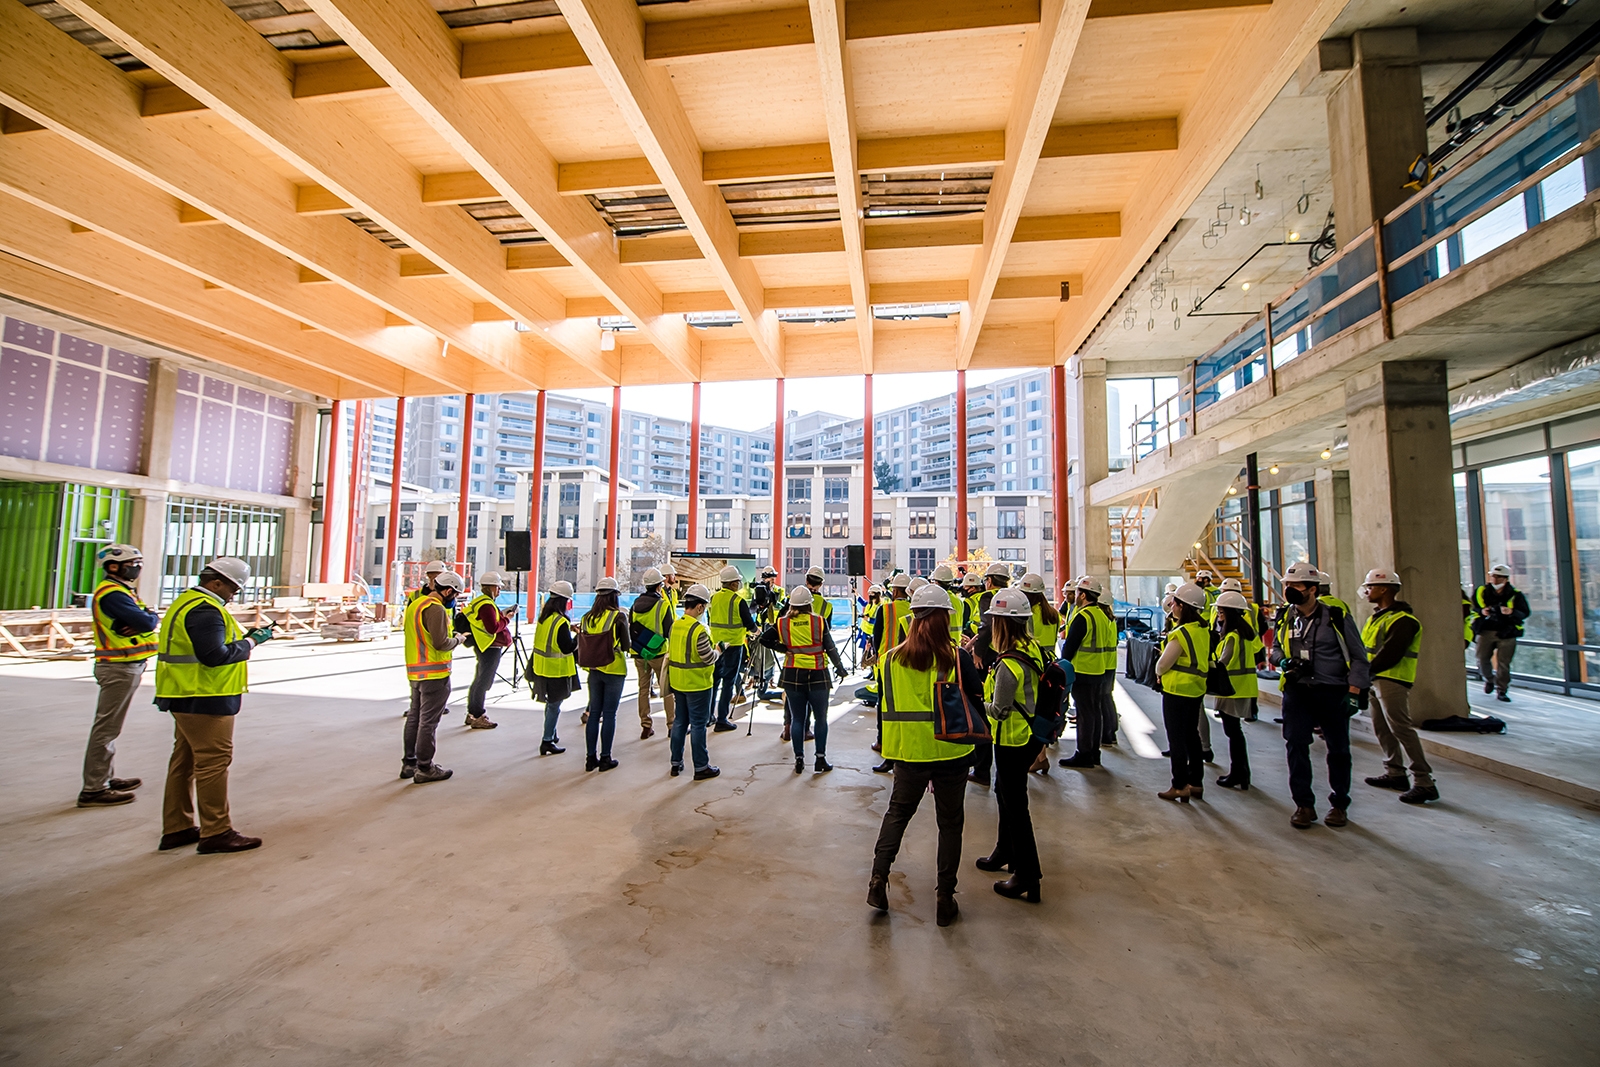 An image of people touring the construction site of Amazon's second headquarters while wearing hard hats that say "Amazon" and bright yellow safety vests.